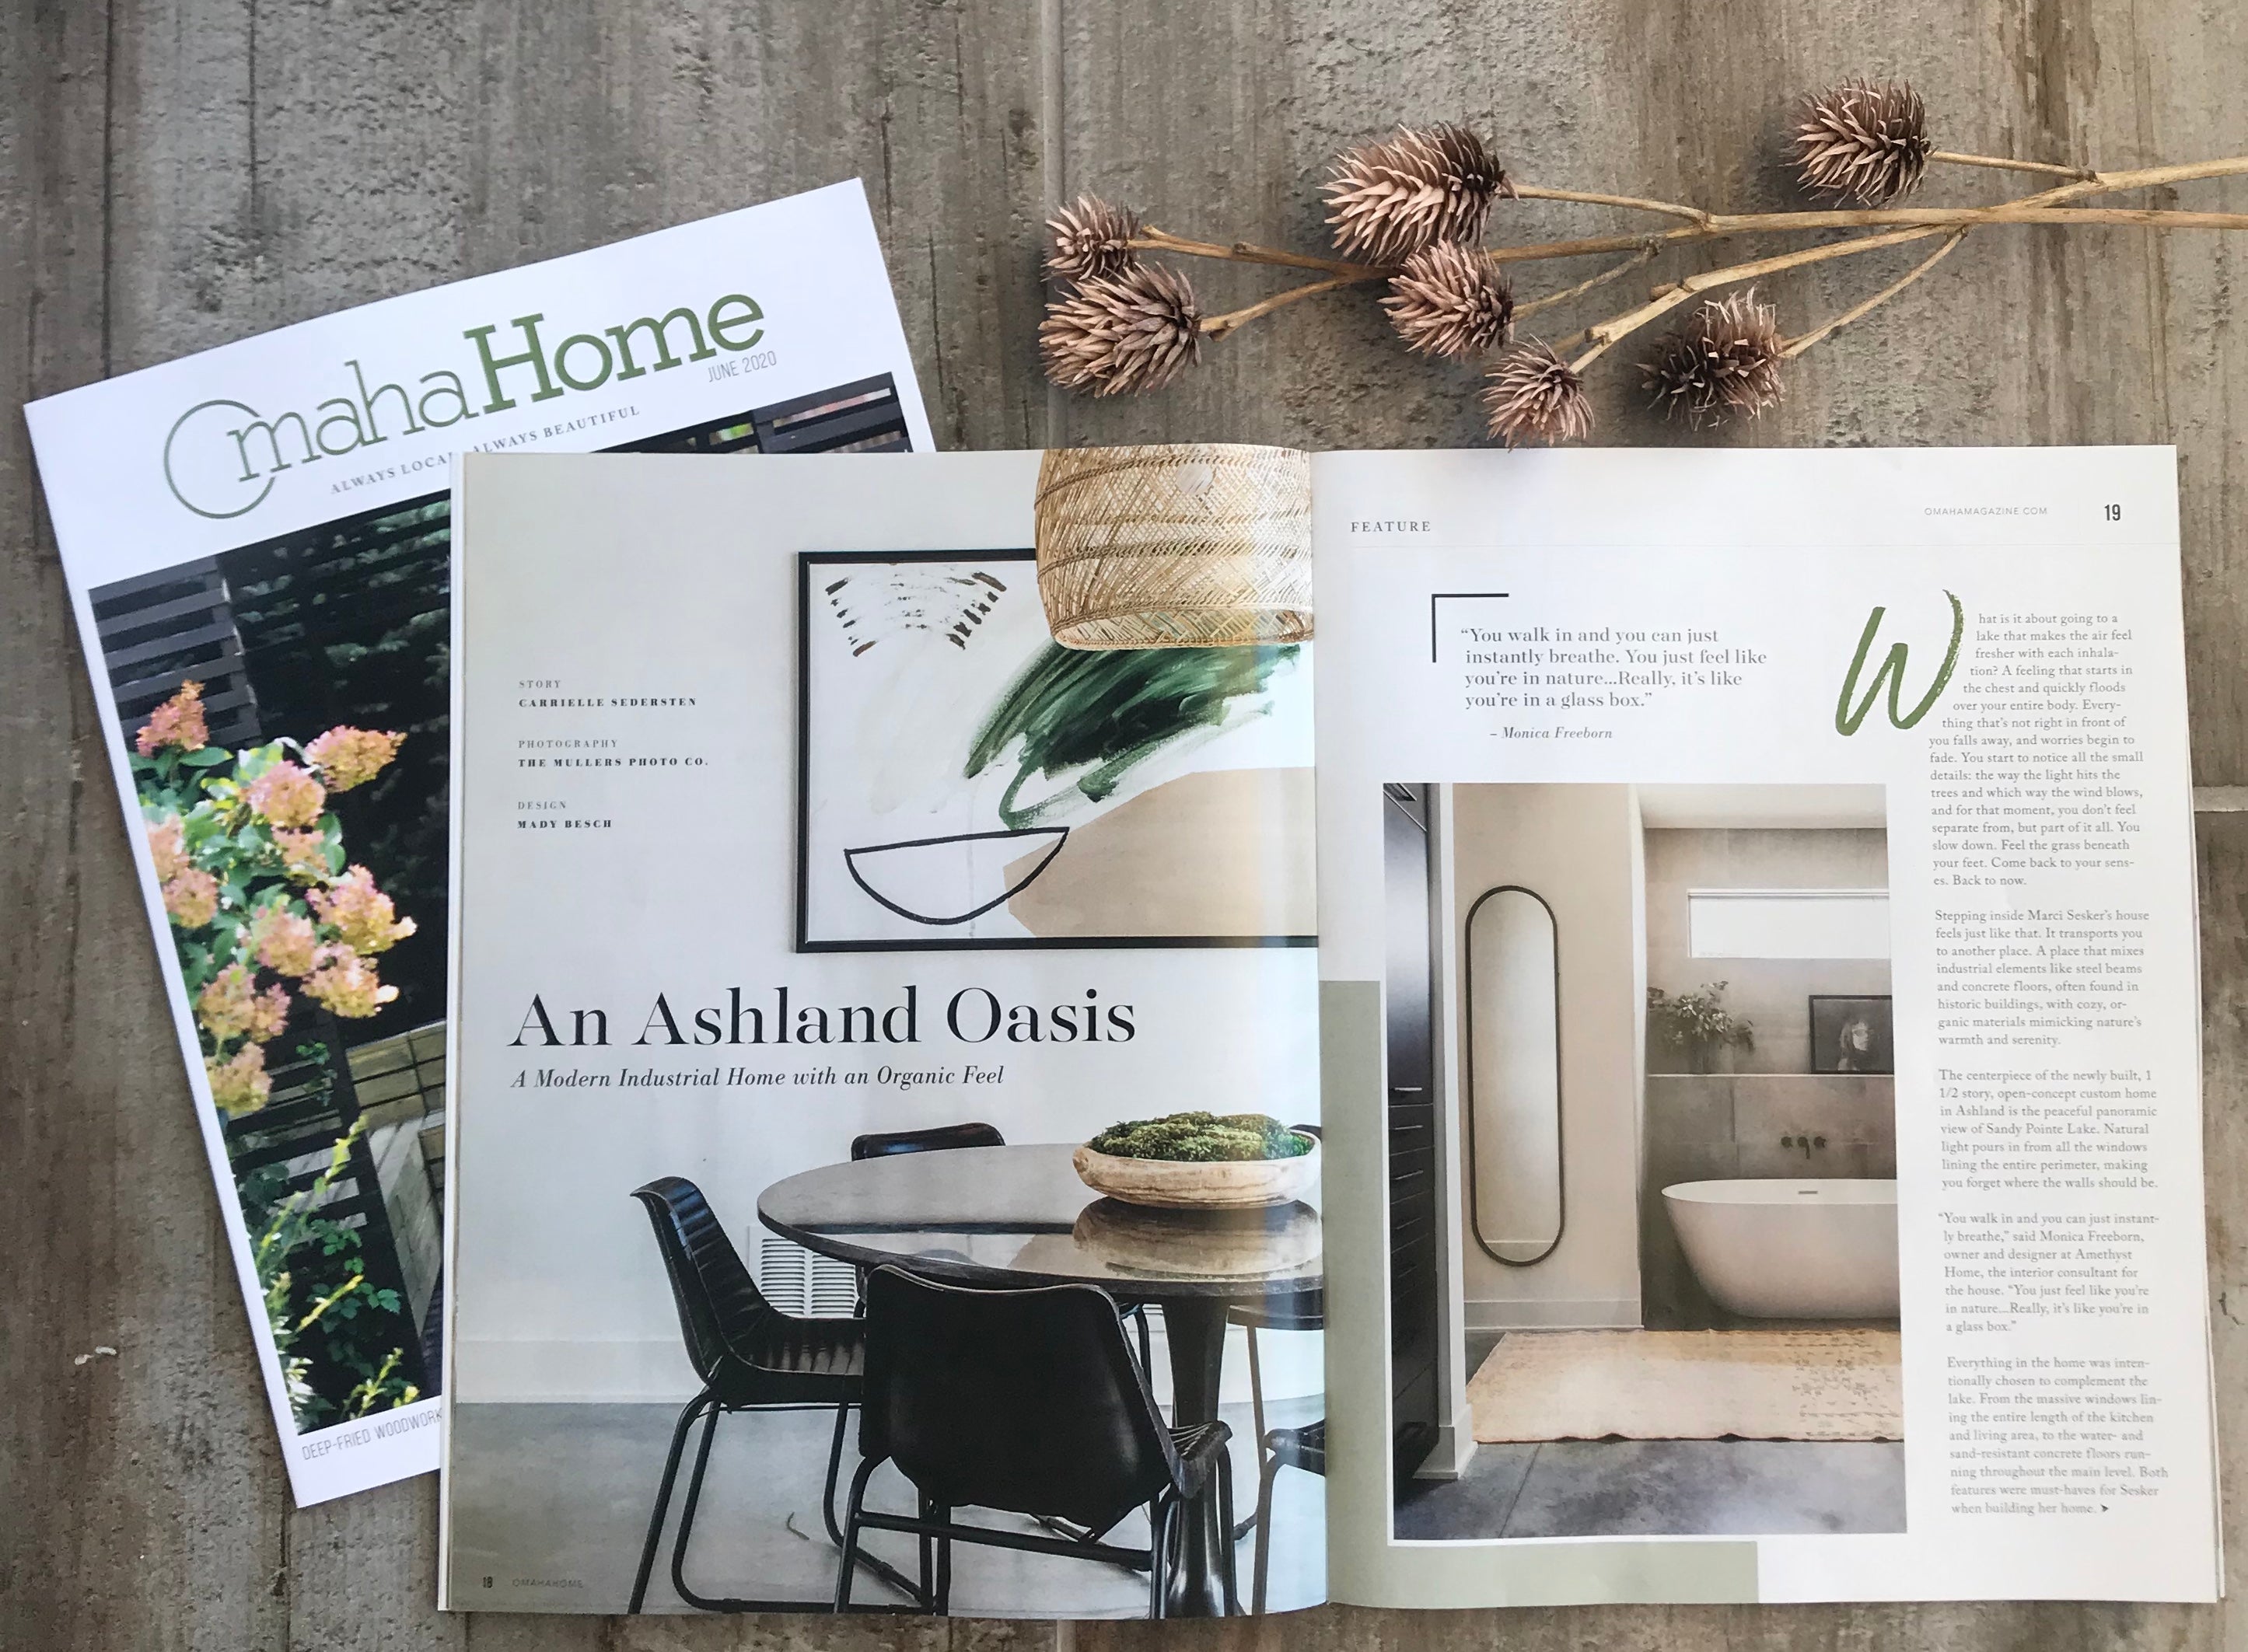 Omaha Home Magazine Features Our Client's Ashland "Oasis"